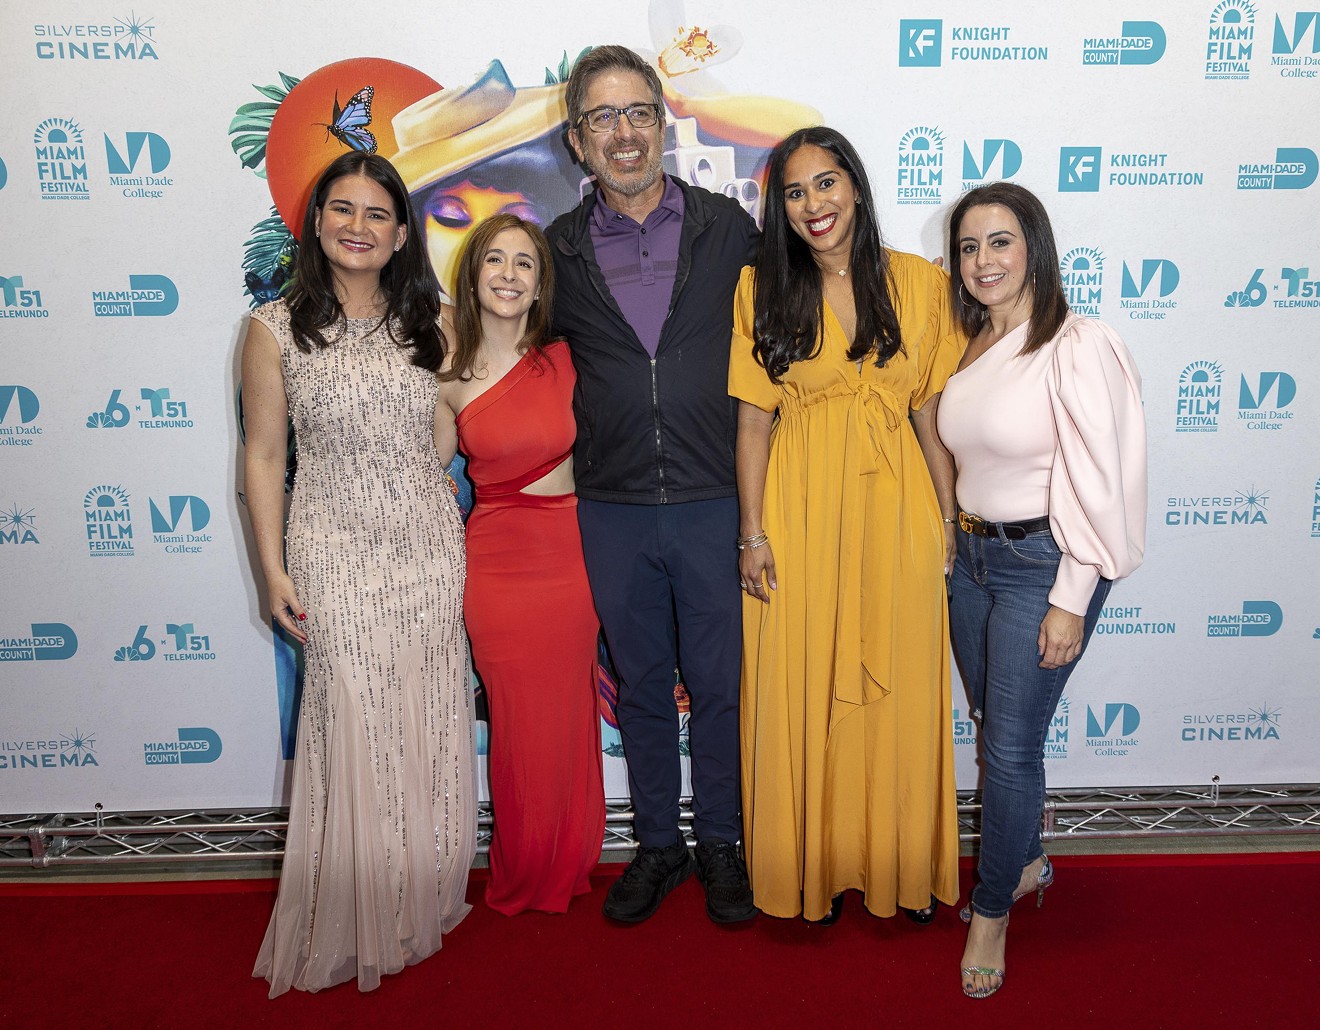 Miami Dade College executive director of cultural affairs María Carla Chicuén (left), director of programming at Miami Film Festival Lauren Cohen, actor Ray Romano, MDC vice president for external affairs & strategy and chief of staff Maryam Laguna Borrego, and MDC board member Dr. Anay Abraham